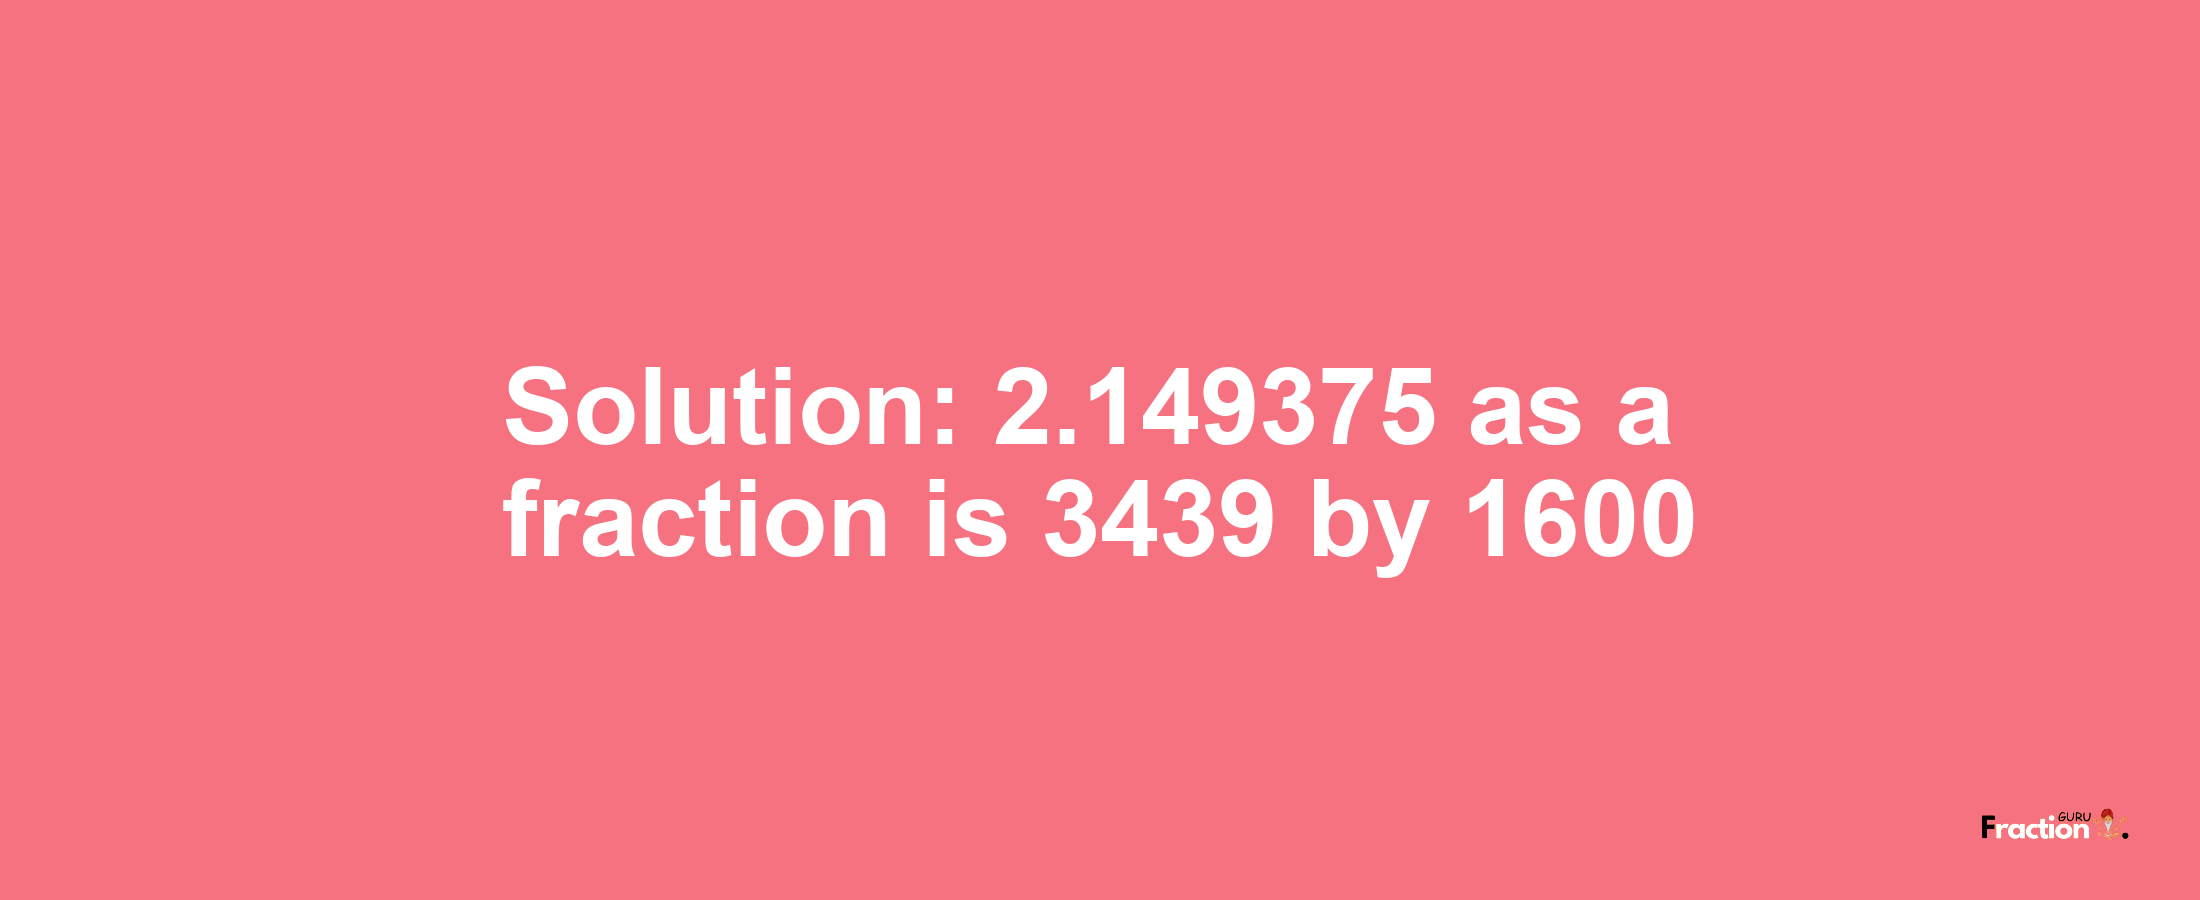 Solution:2.149375 as a fraction is 3439/1600